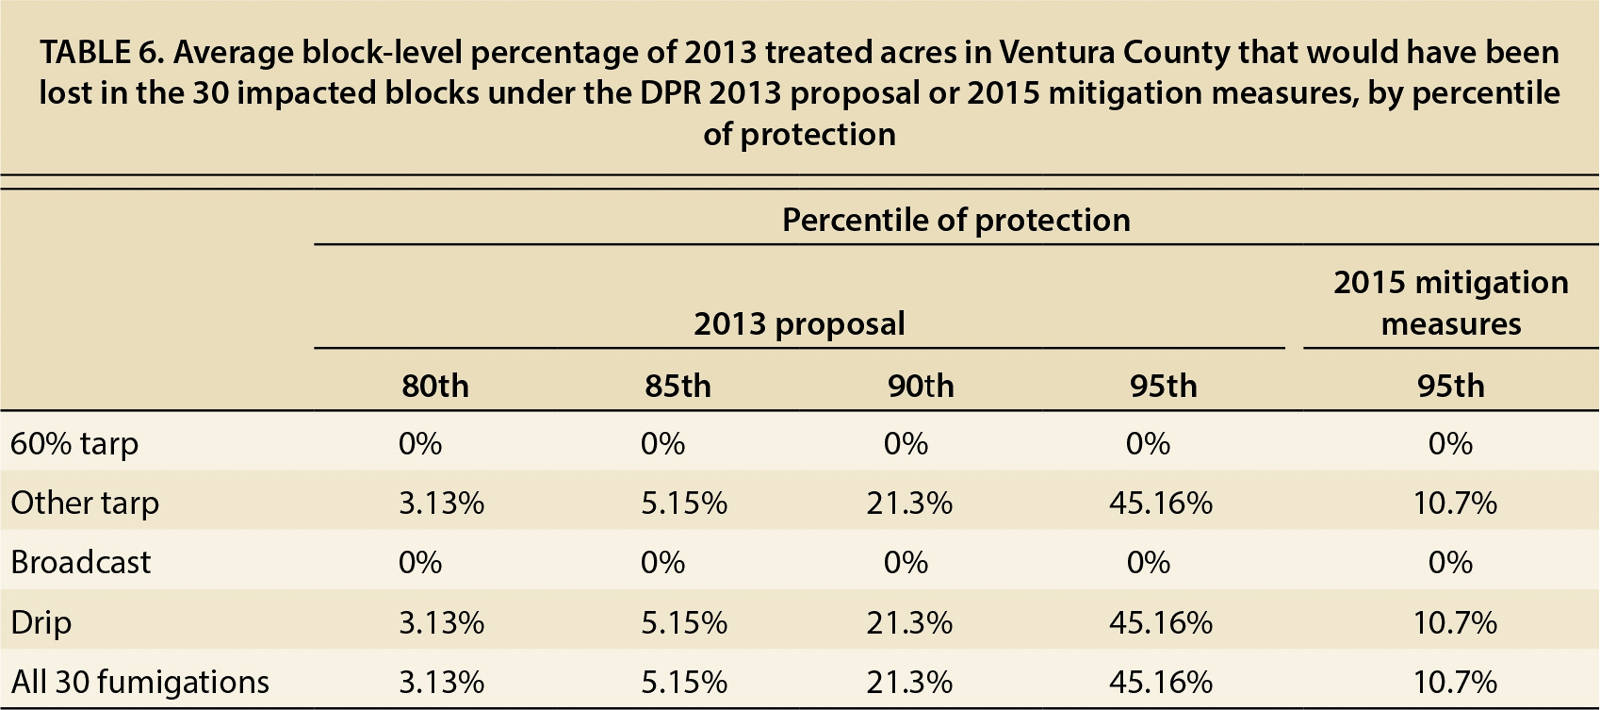 Average block-level percentage of 2013 treated acres in Ventura County that would have been lost in the 30 impacted blocks under the DPR 2013 proposal or 2015 mitigation measures, by percentile